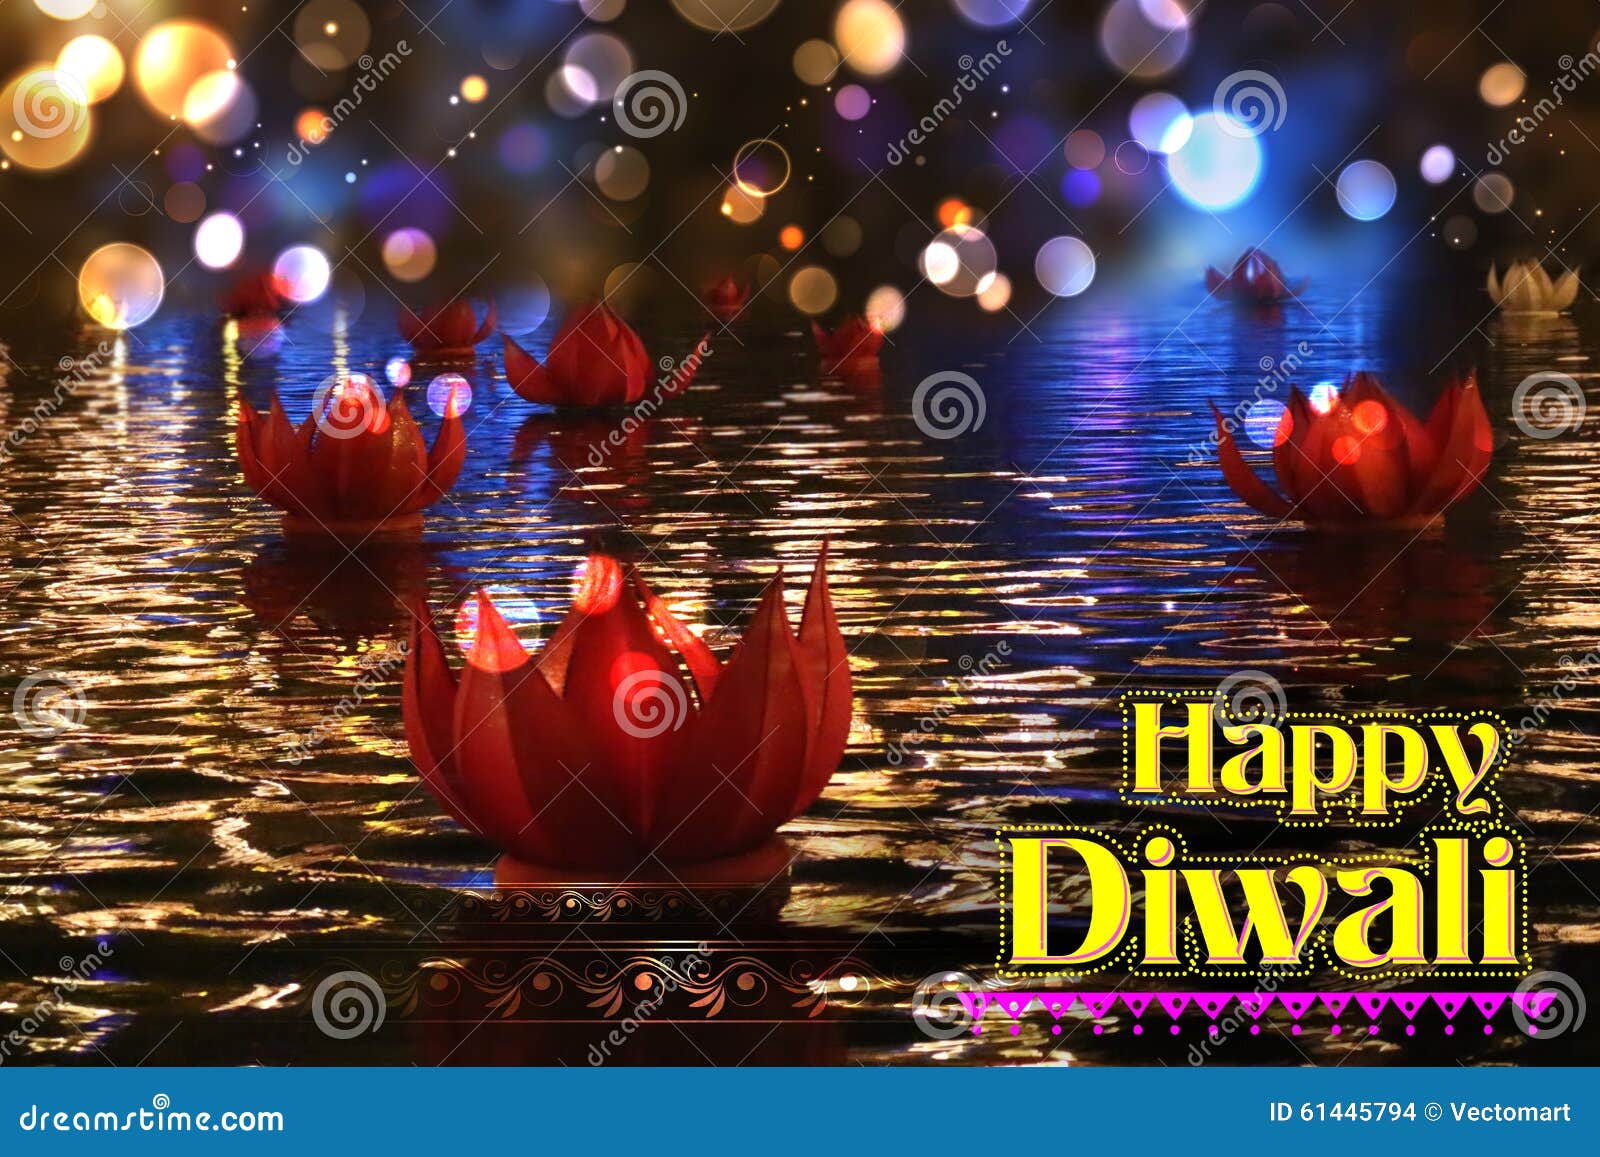 Diwali Background with Gold Glittery Lights Stock Vector  Illustration of  background deepavali 126832904